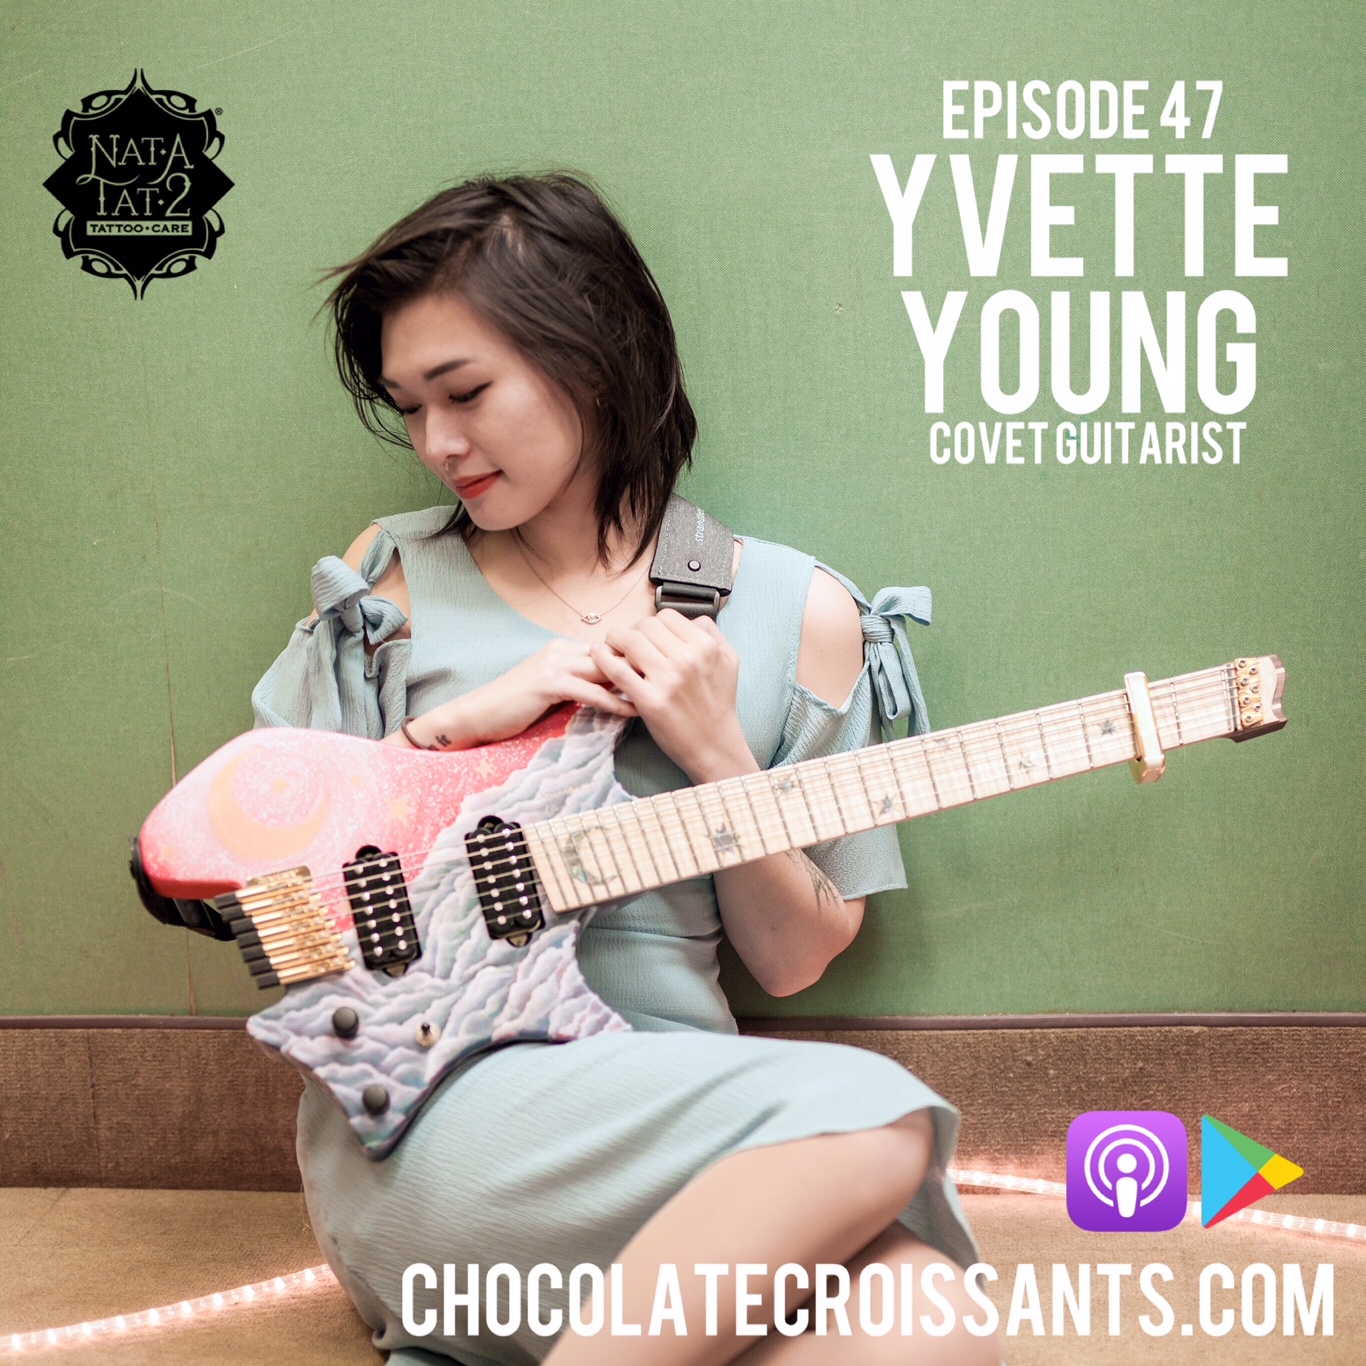 Episode 47: Yvette Young (Covet Guitarist)